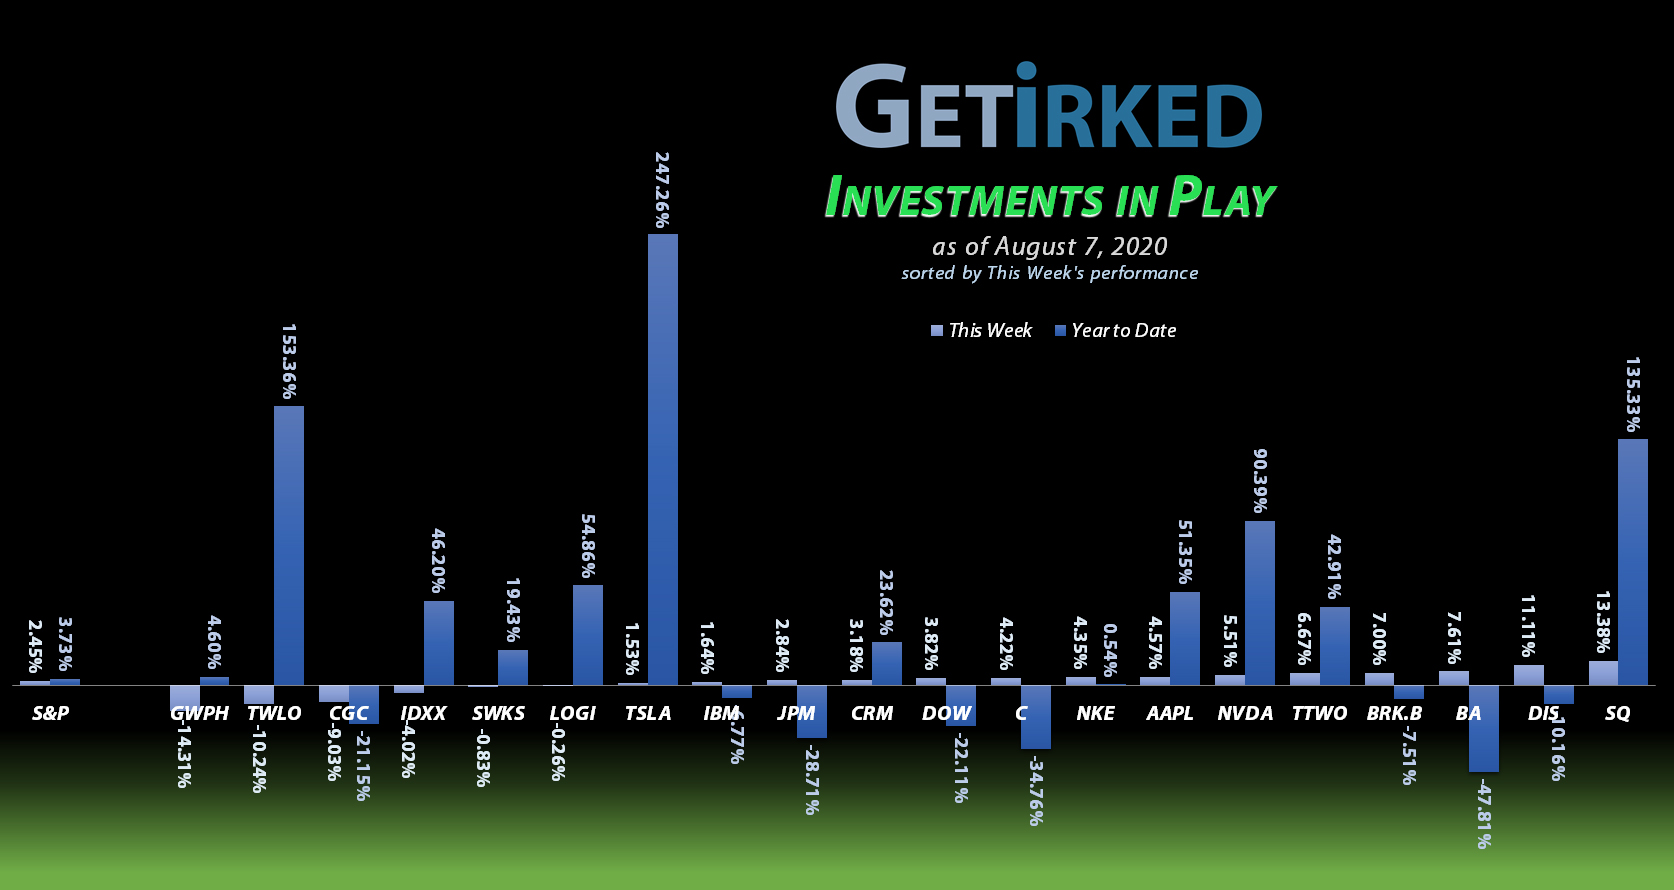 Get Irked - Investments in Play - August 7, 2020